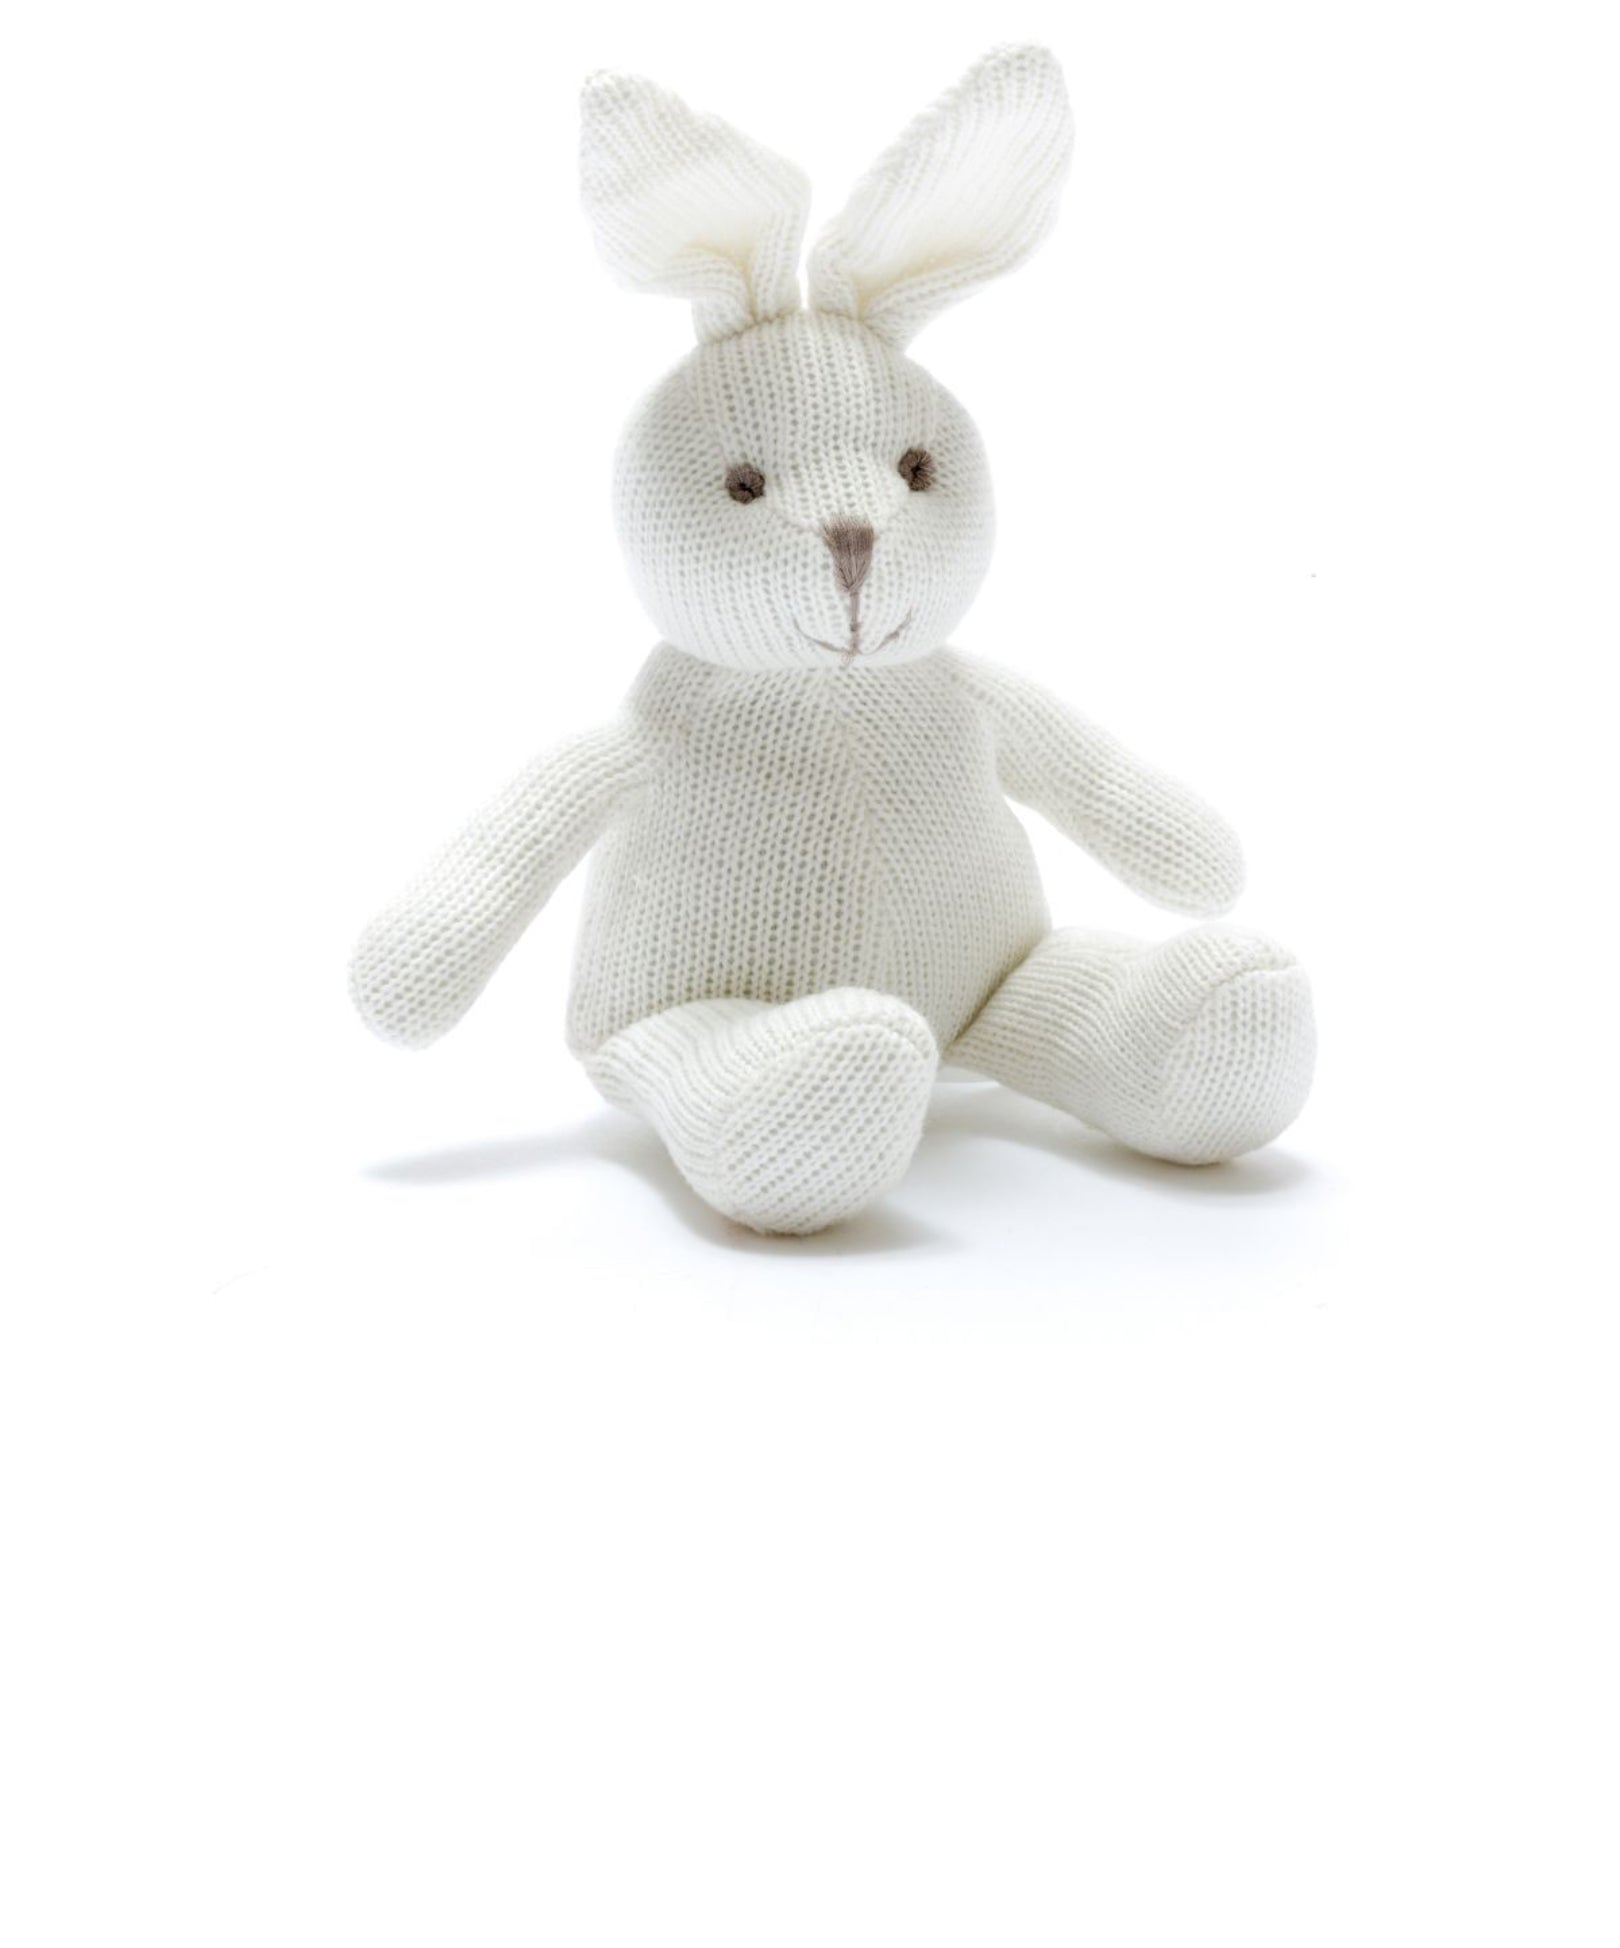 Knitted Cotton White Bunny Rabbit Baby Rattle